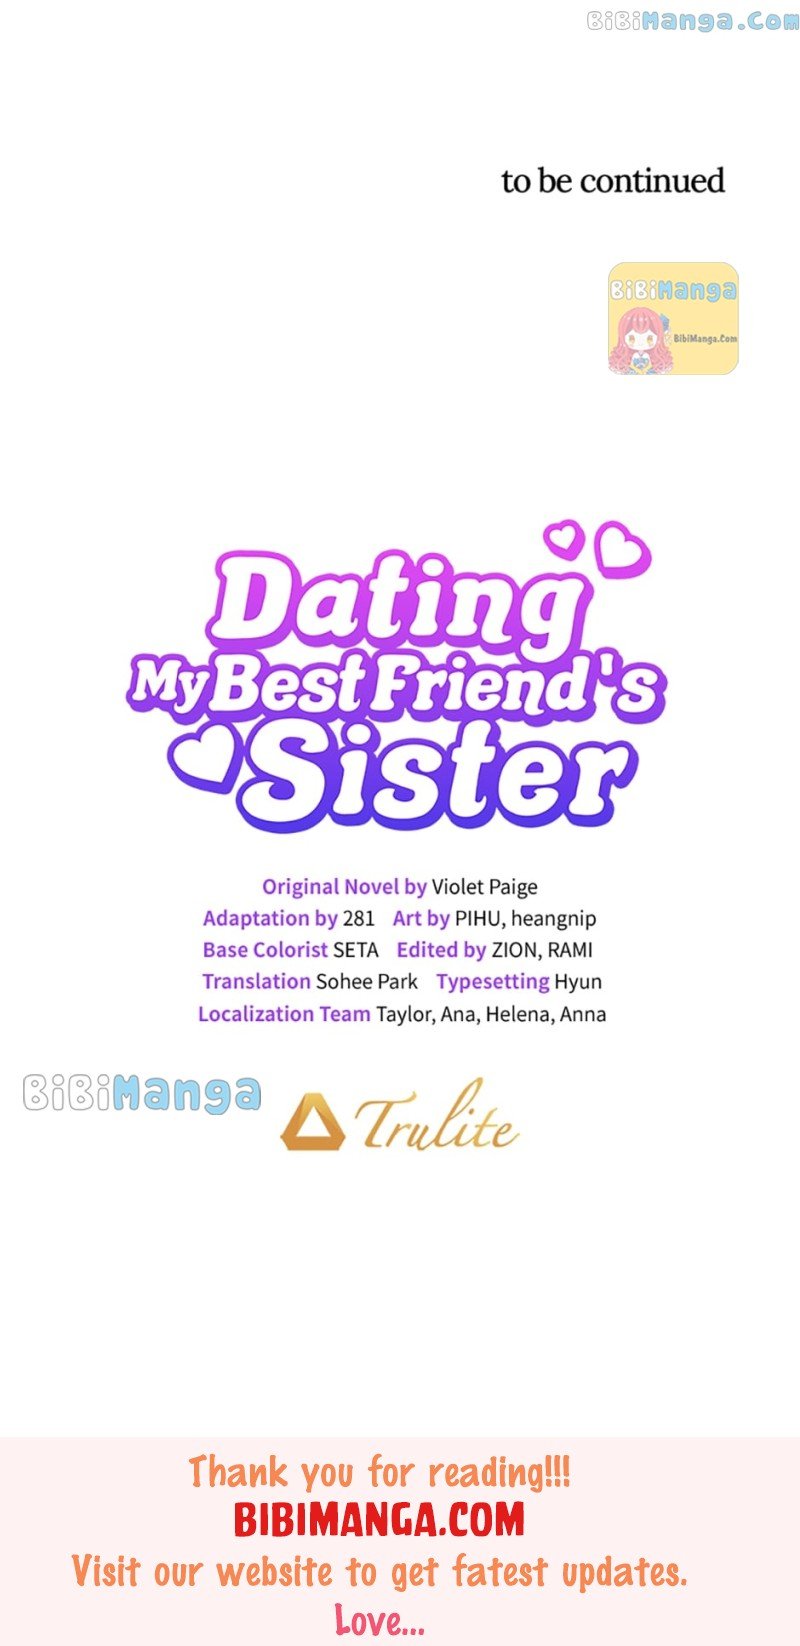 Dating My Best Friend’s Sister chapter 25